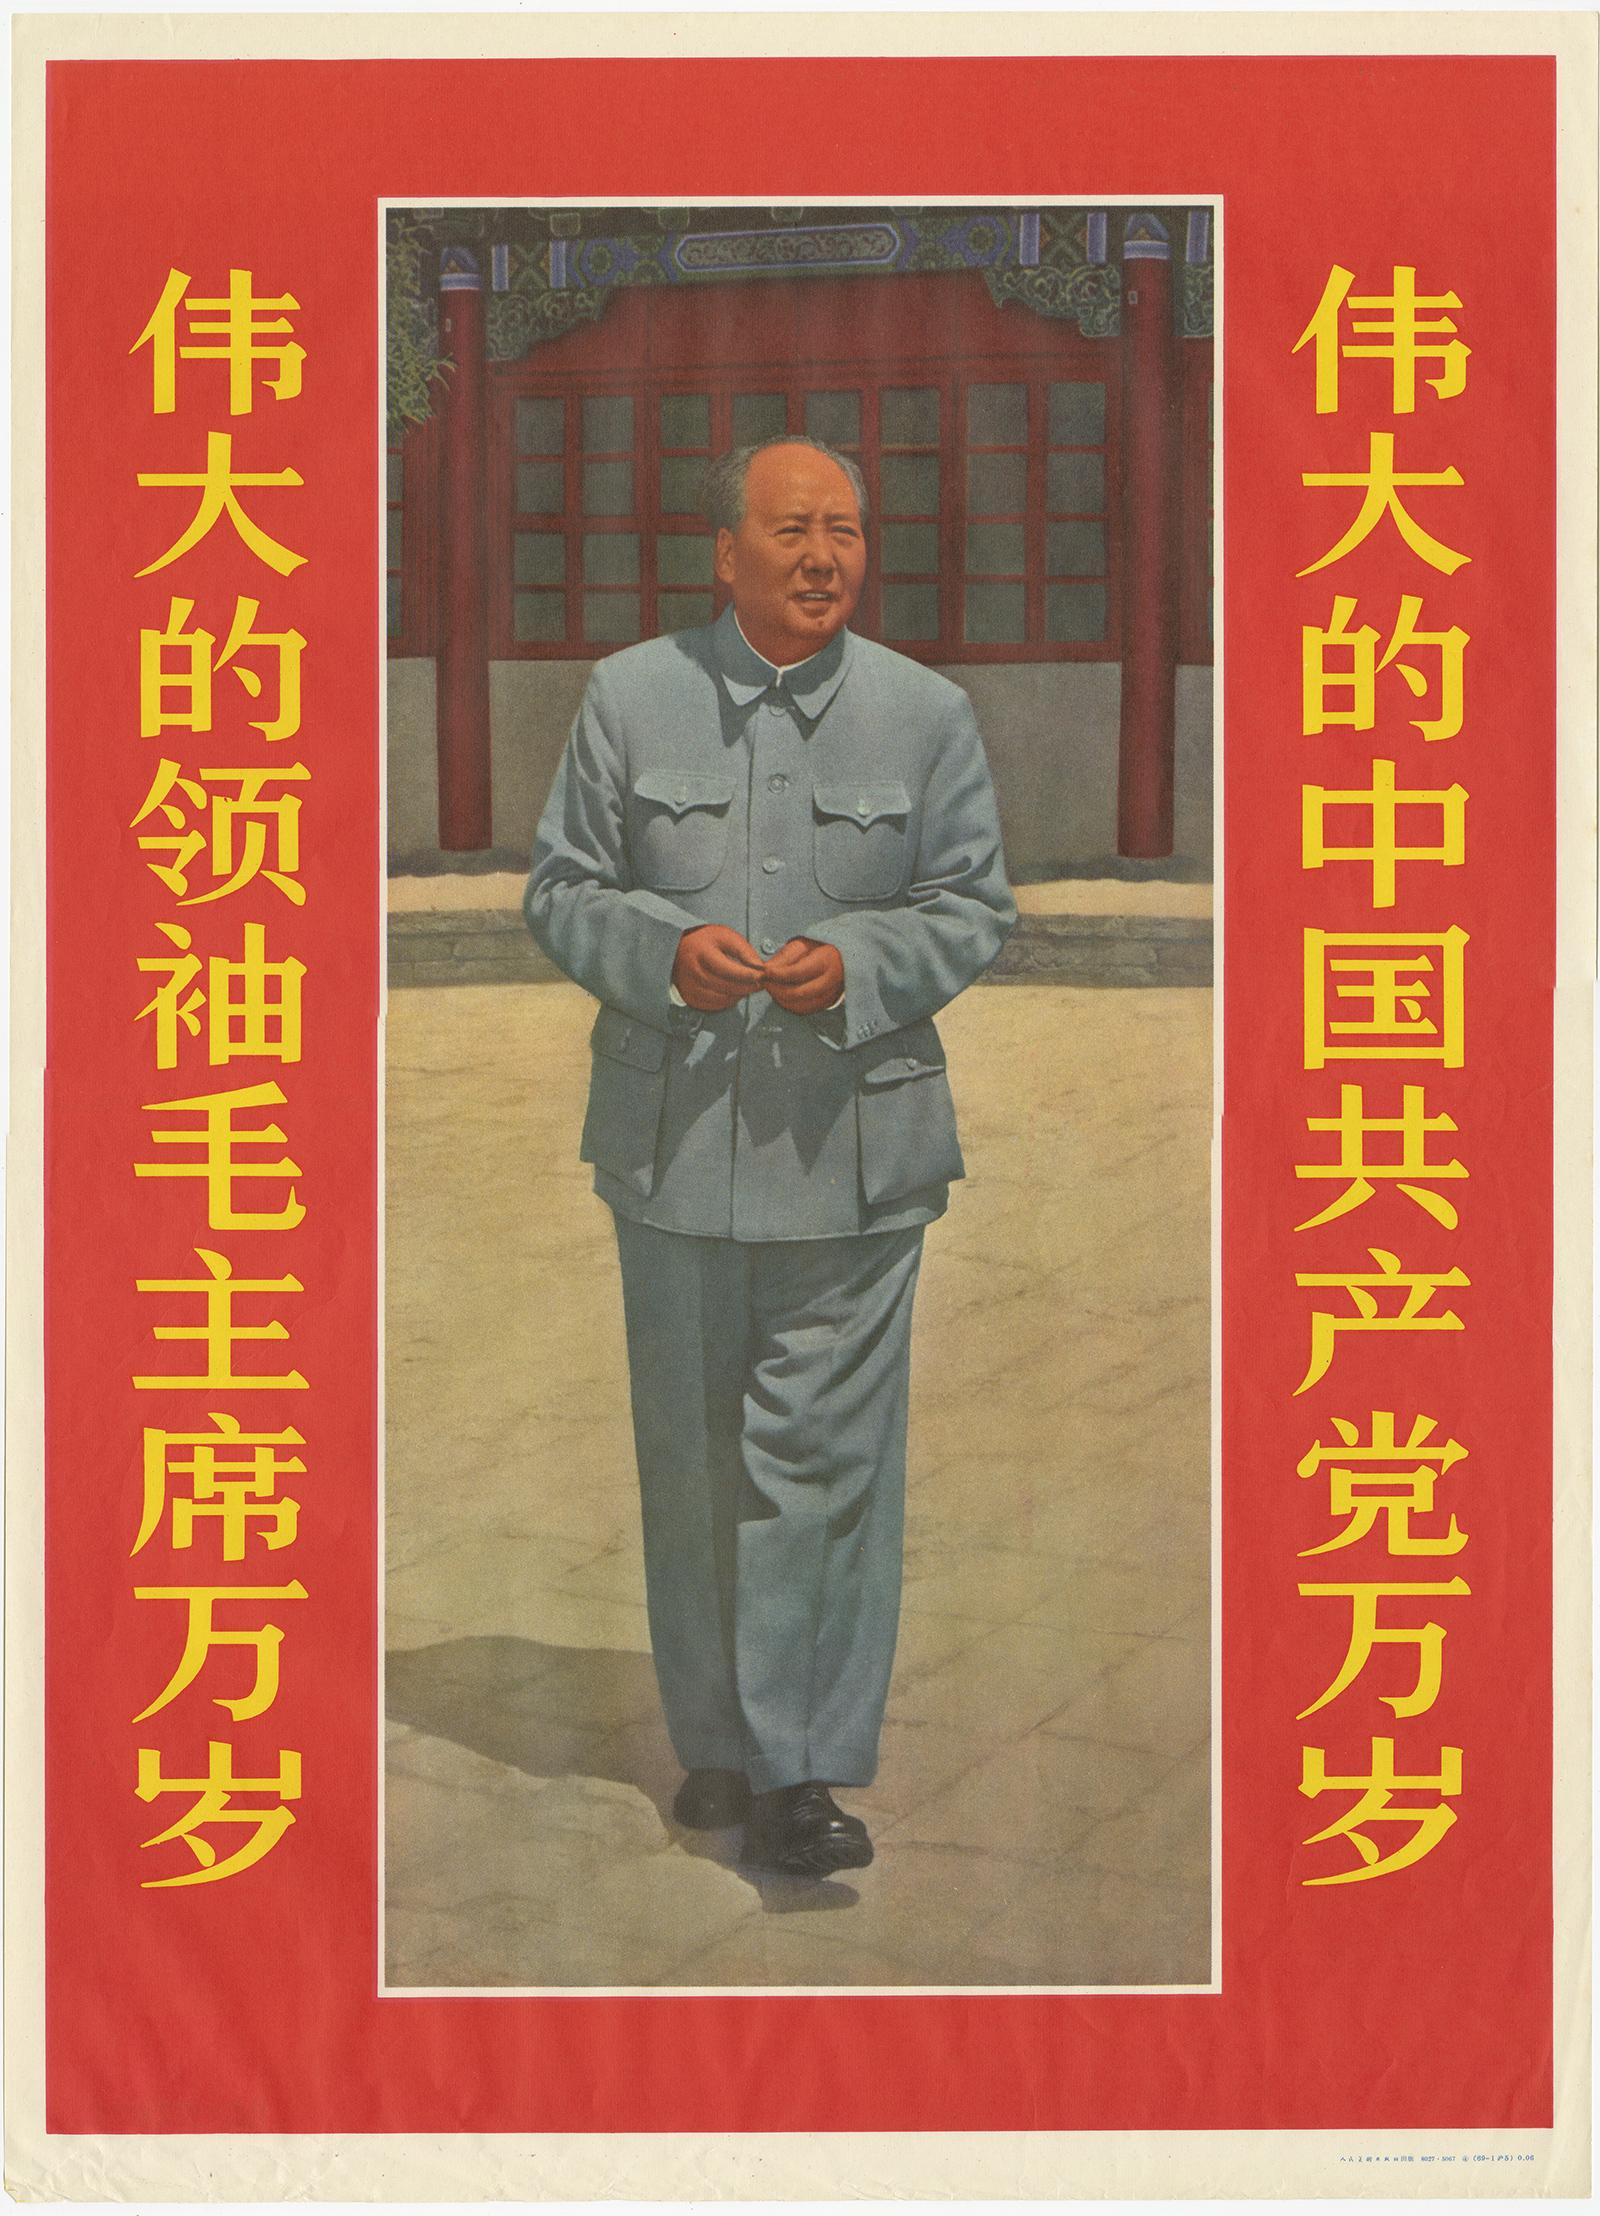 A set of propaganda photographic posters featuring well-known images of Chairman Mao. Mao Zedong, also known as Chairman Mao, was a Chinese communist revolutionary who became the founding father of the People's Republic of China (PRC), which he